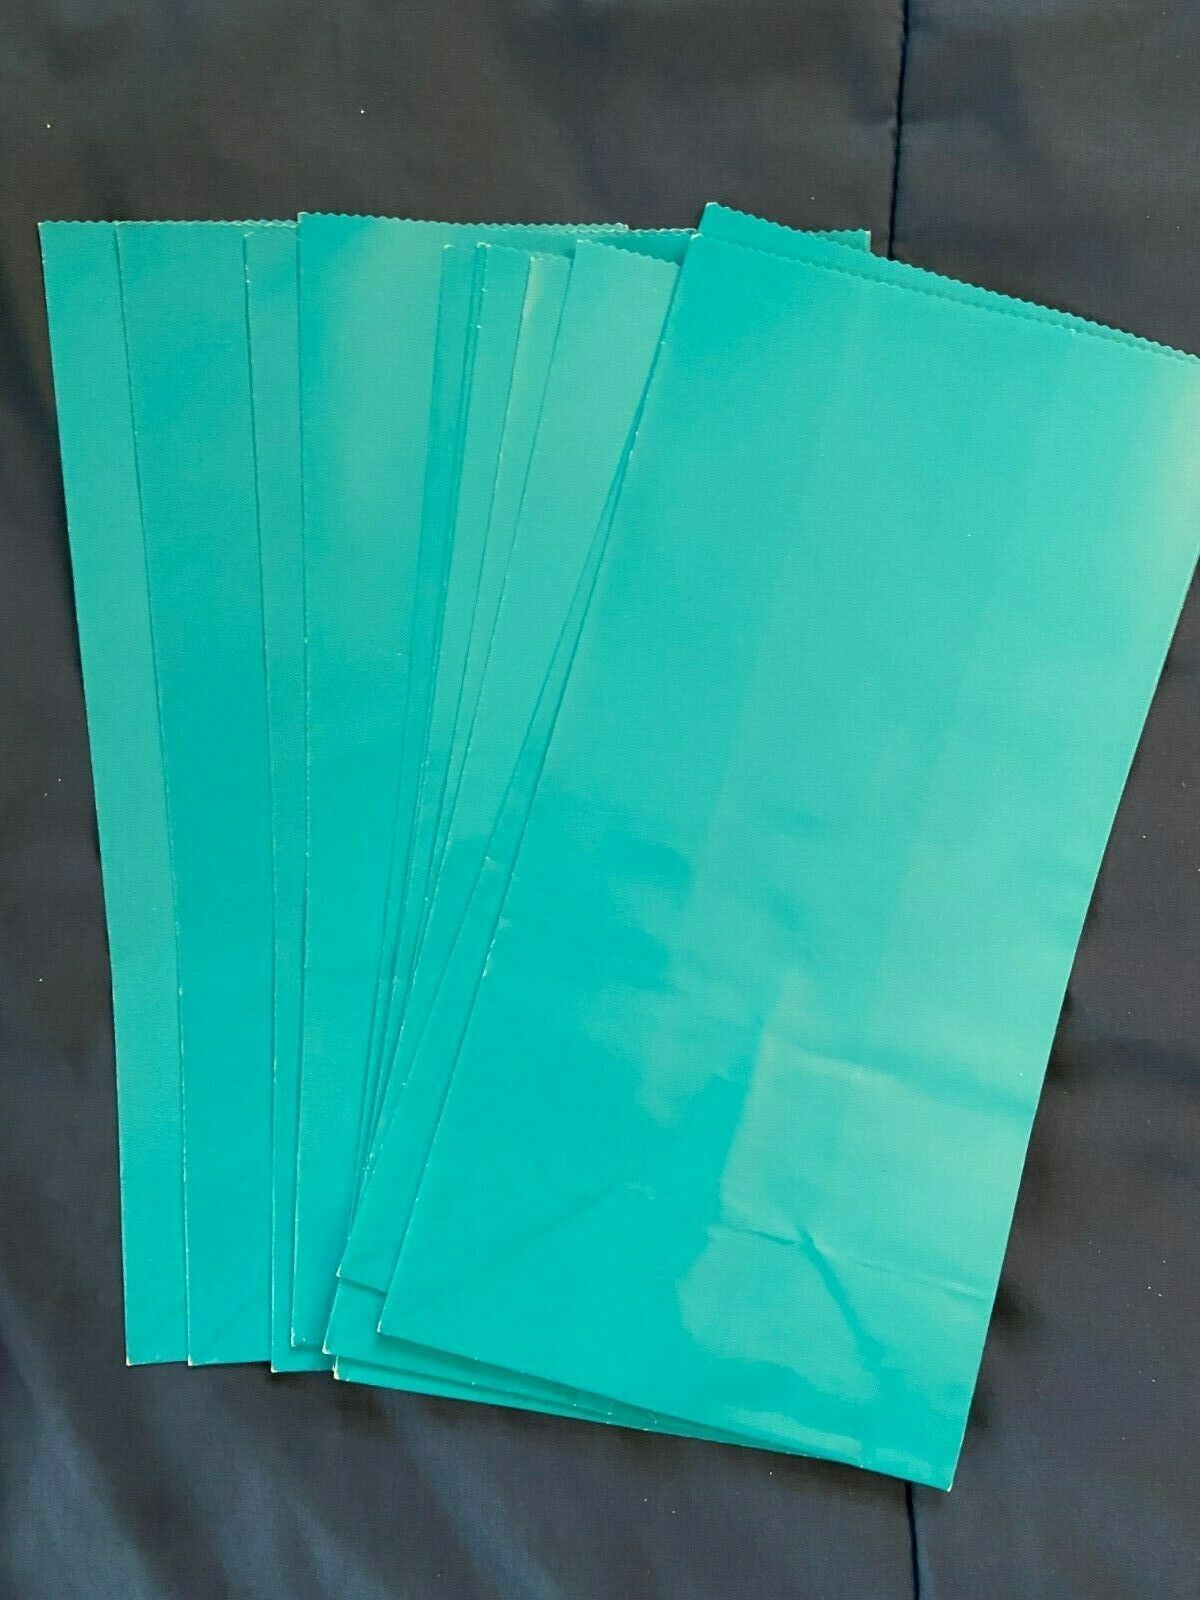 10 Blank Blue Party Bags 10.5 X 5 X 3 1/4" *NEW* k1 - $5.99